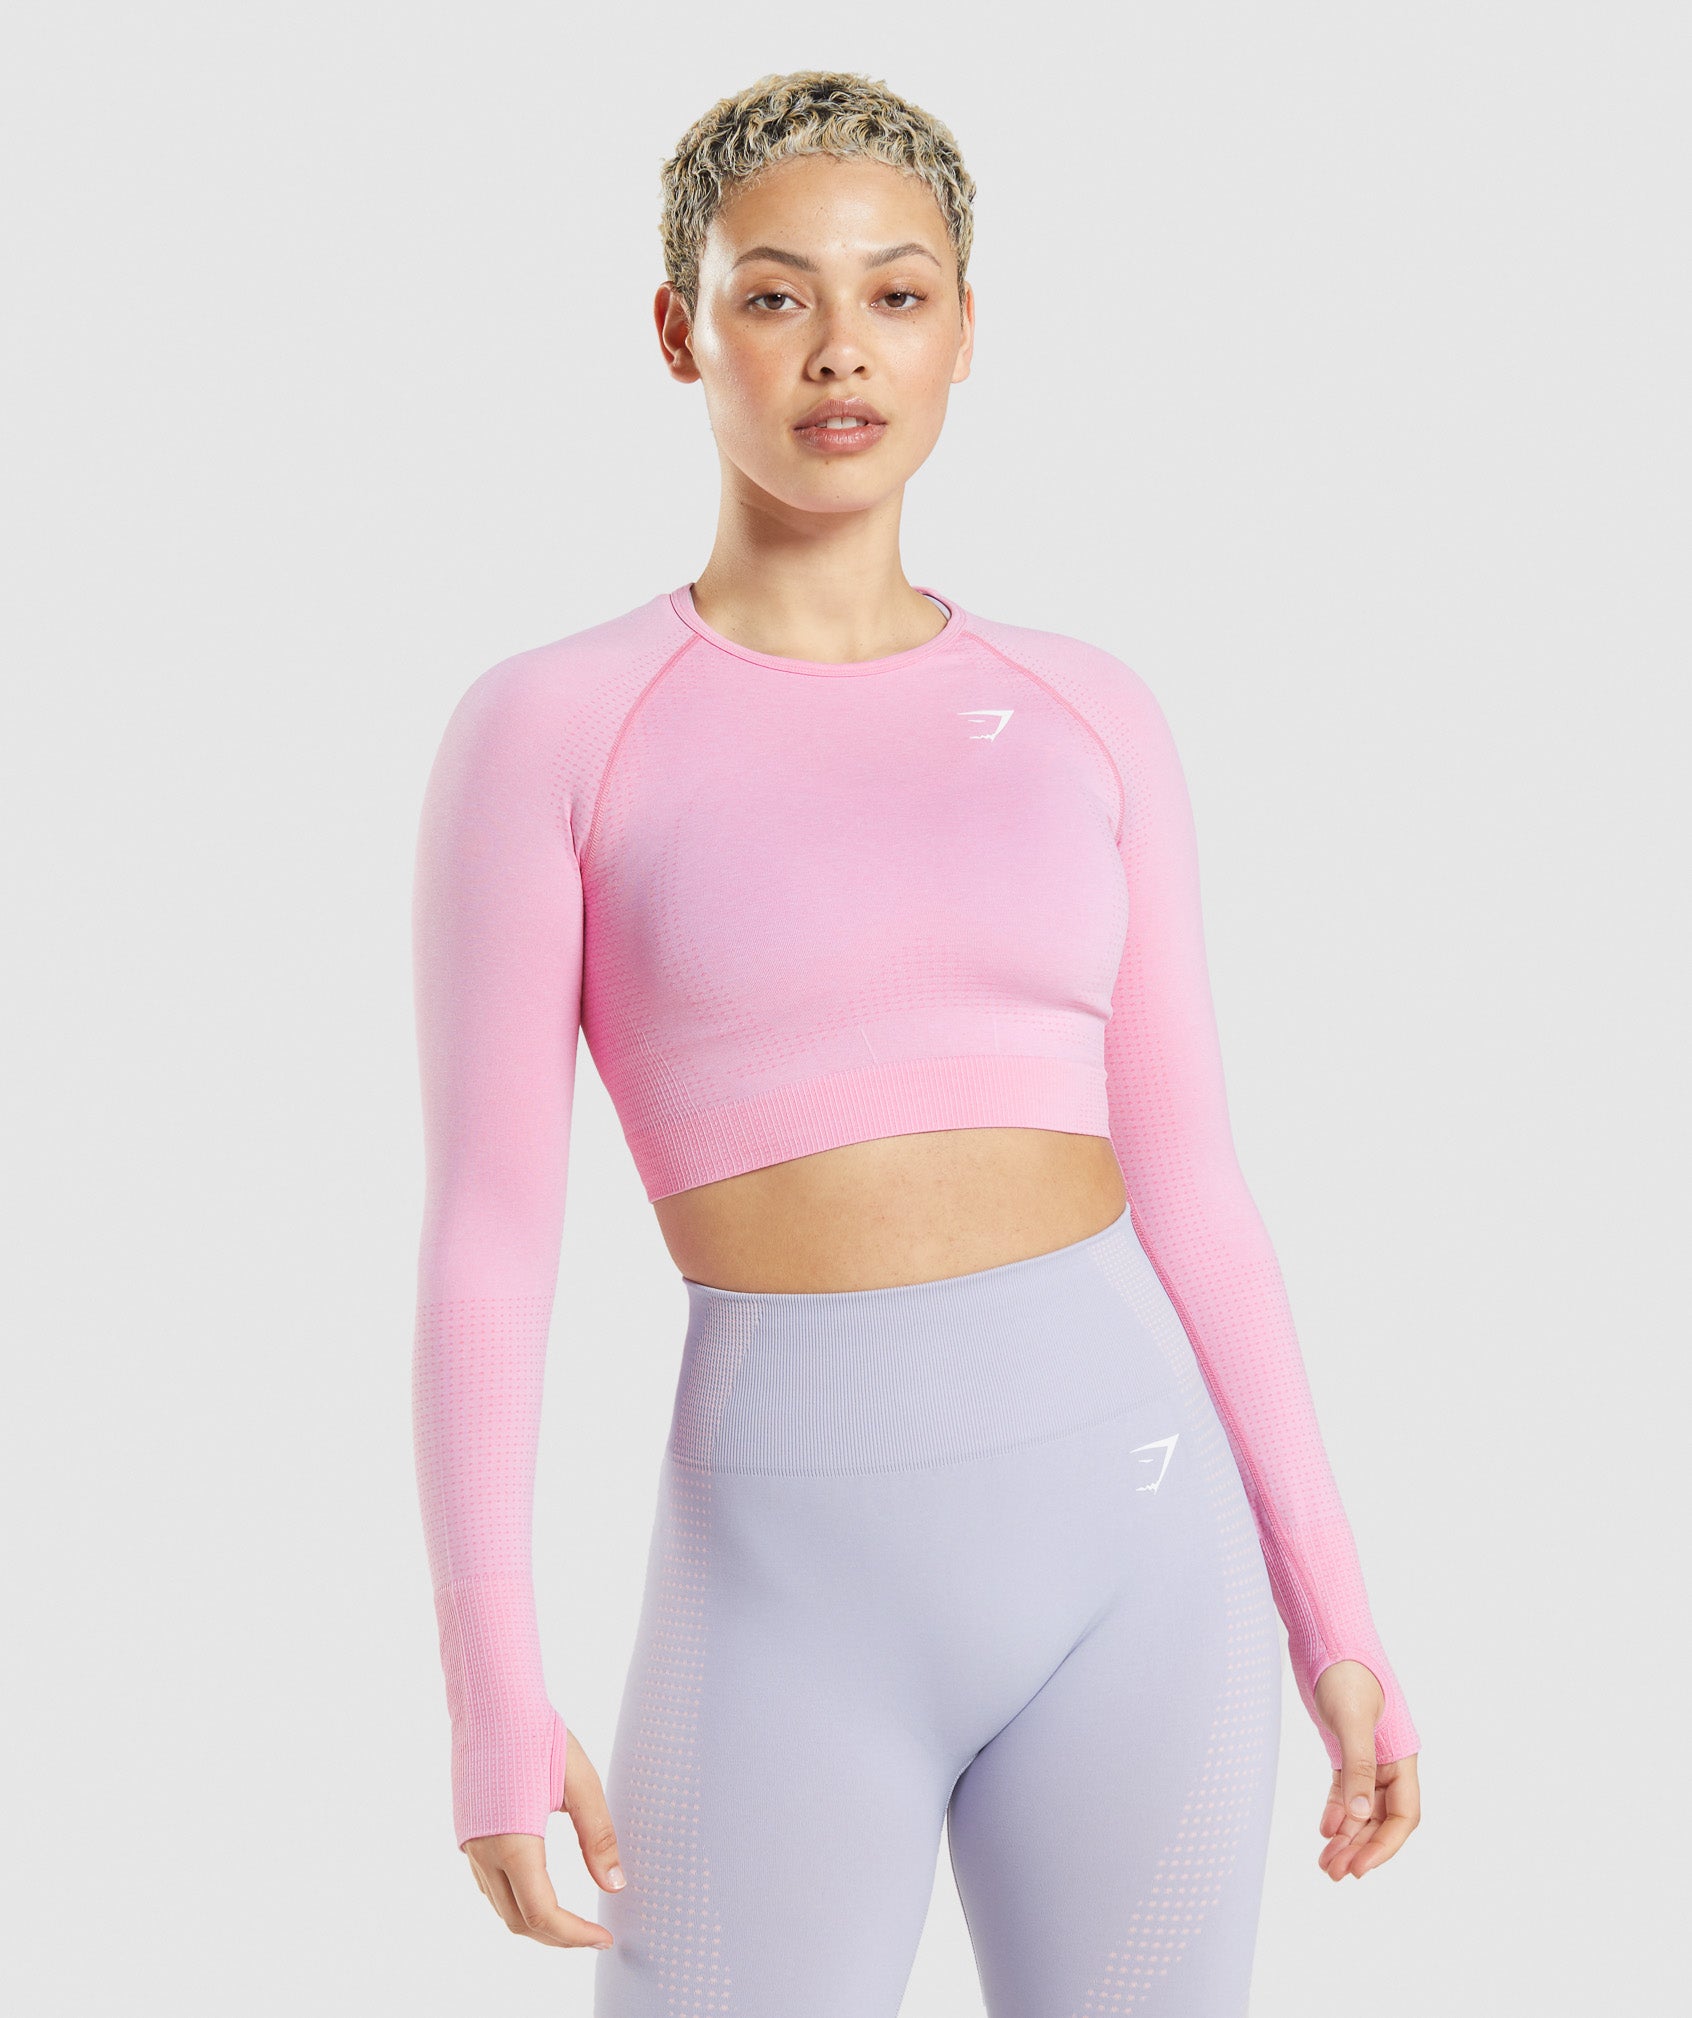 Gymshark Womens Towel Textured Cropped Top Shirt Pale Pink Size Small S